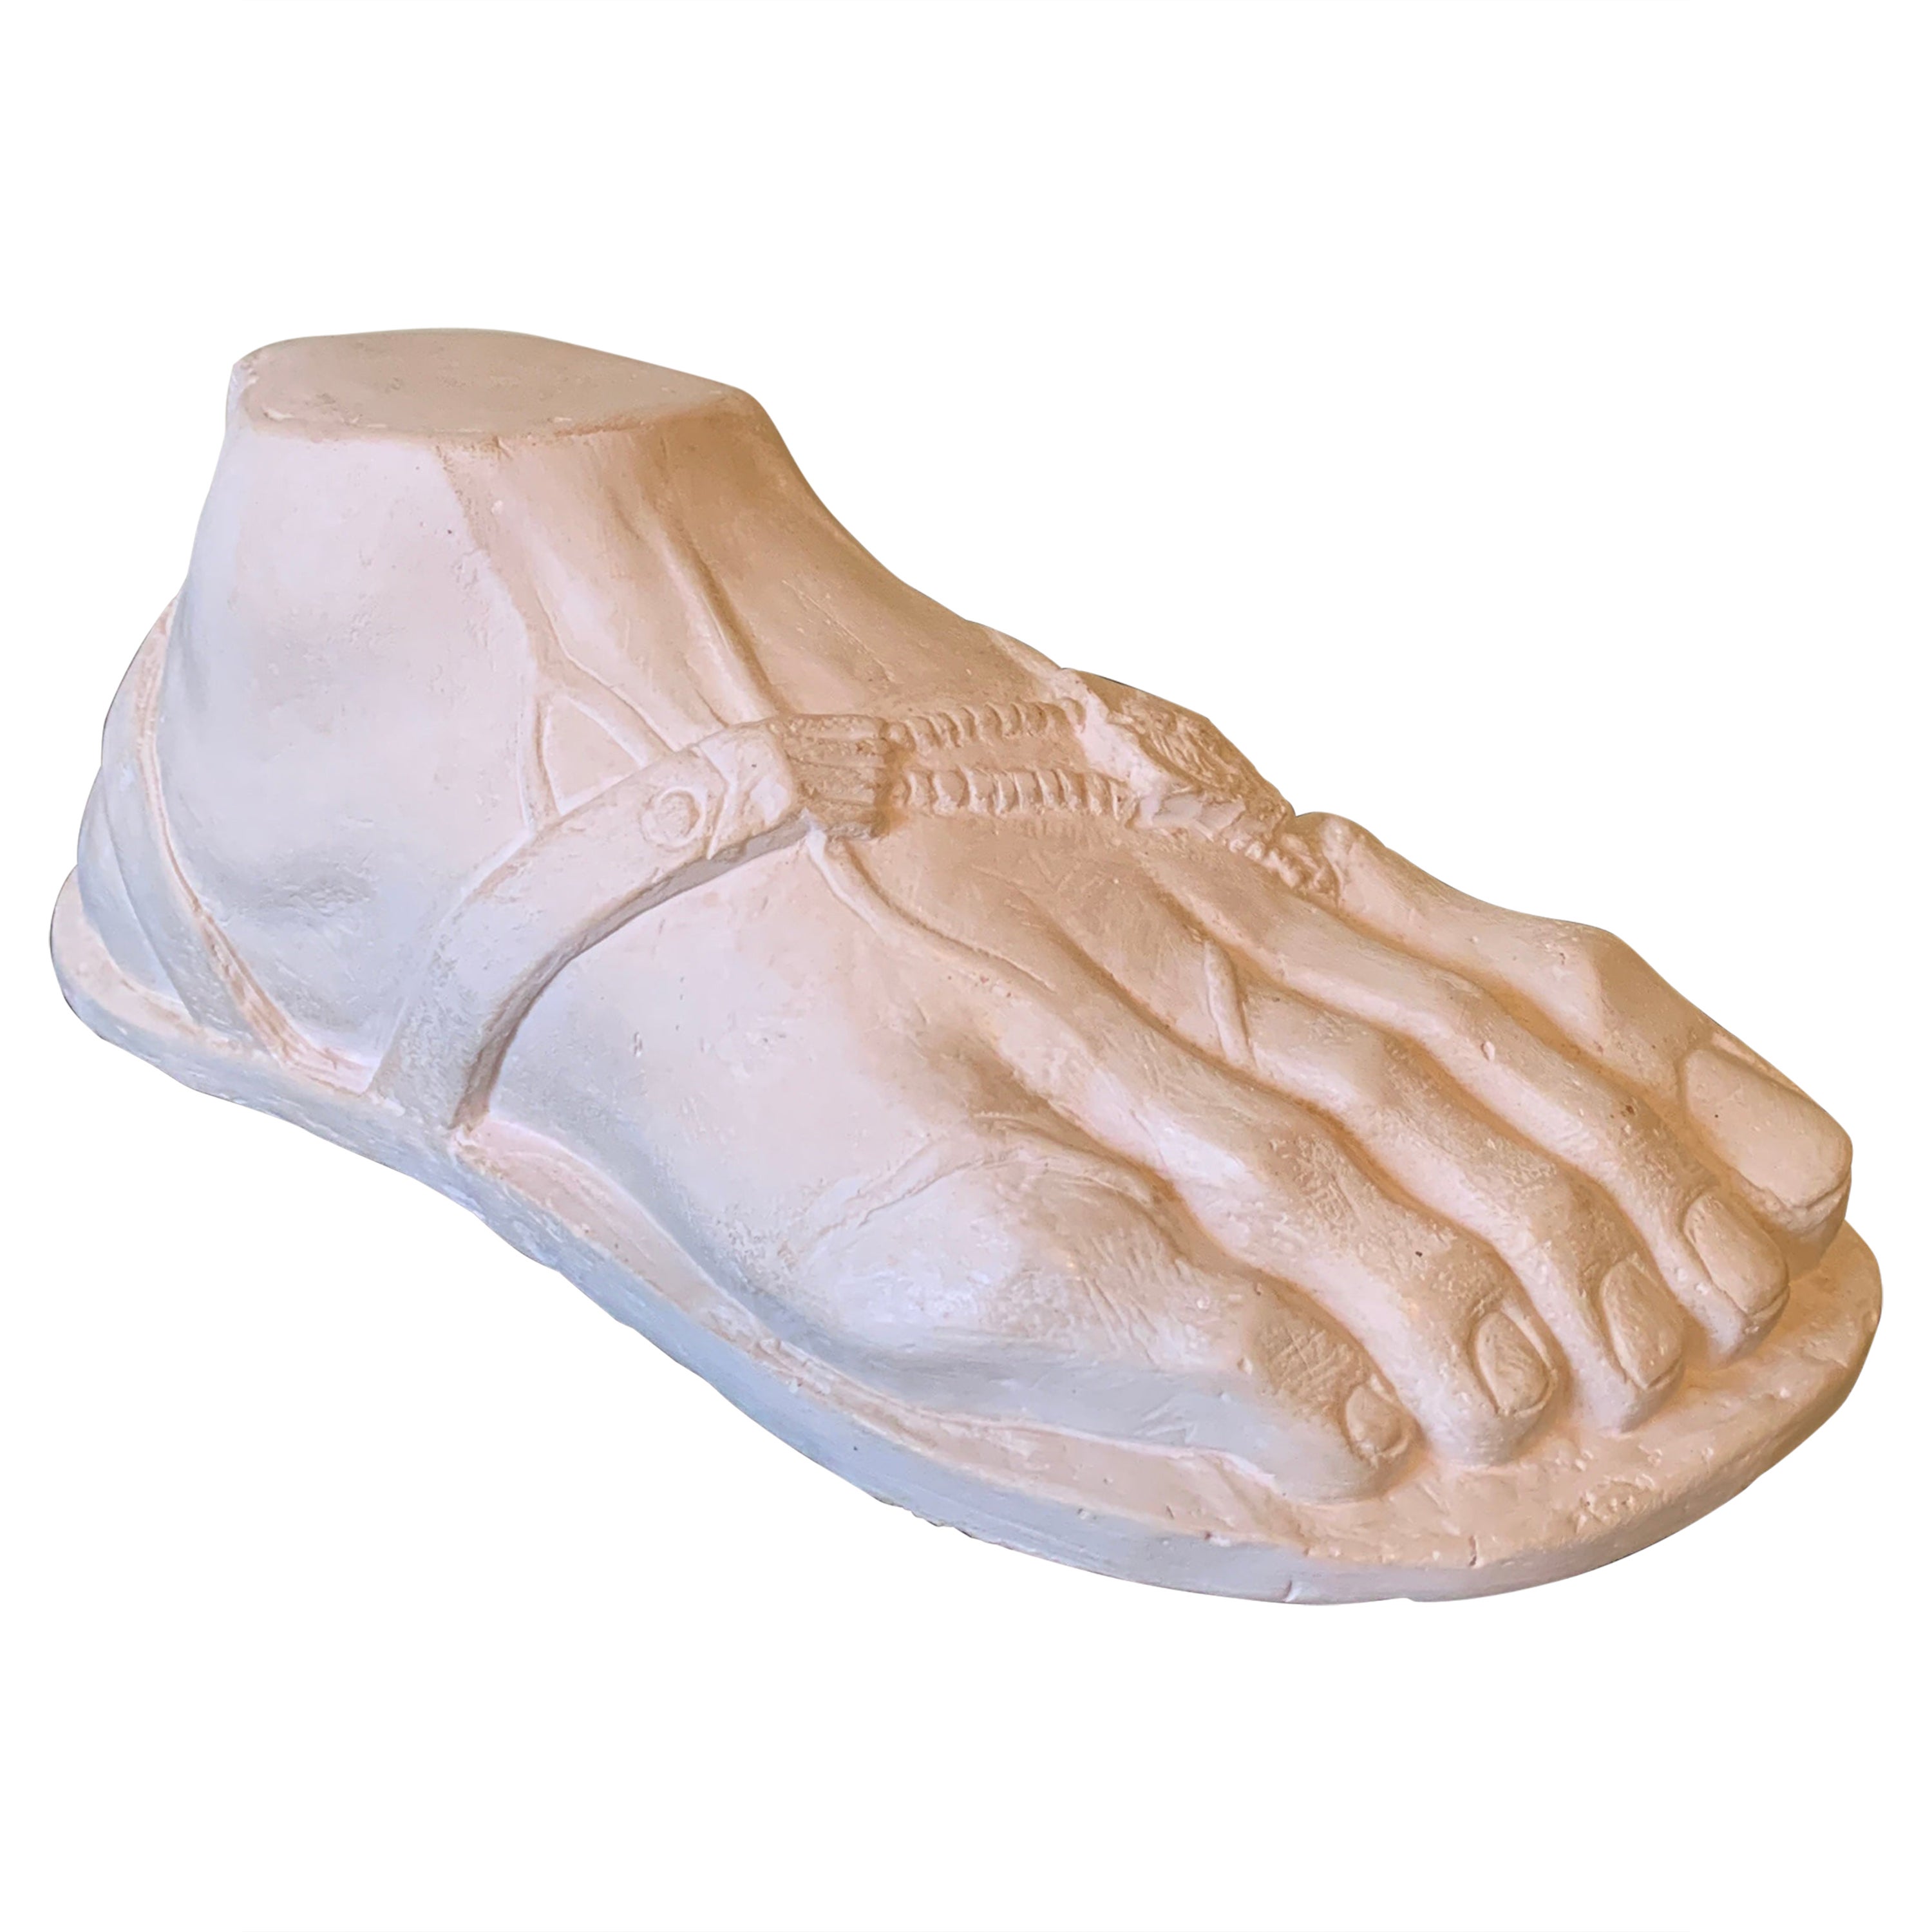 Grand Tour Style Greek or Roman Plaster Foot Sculpture For Sale